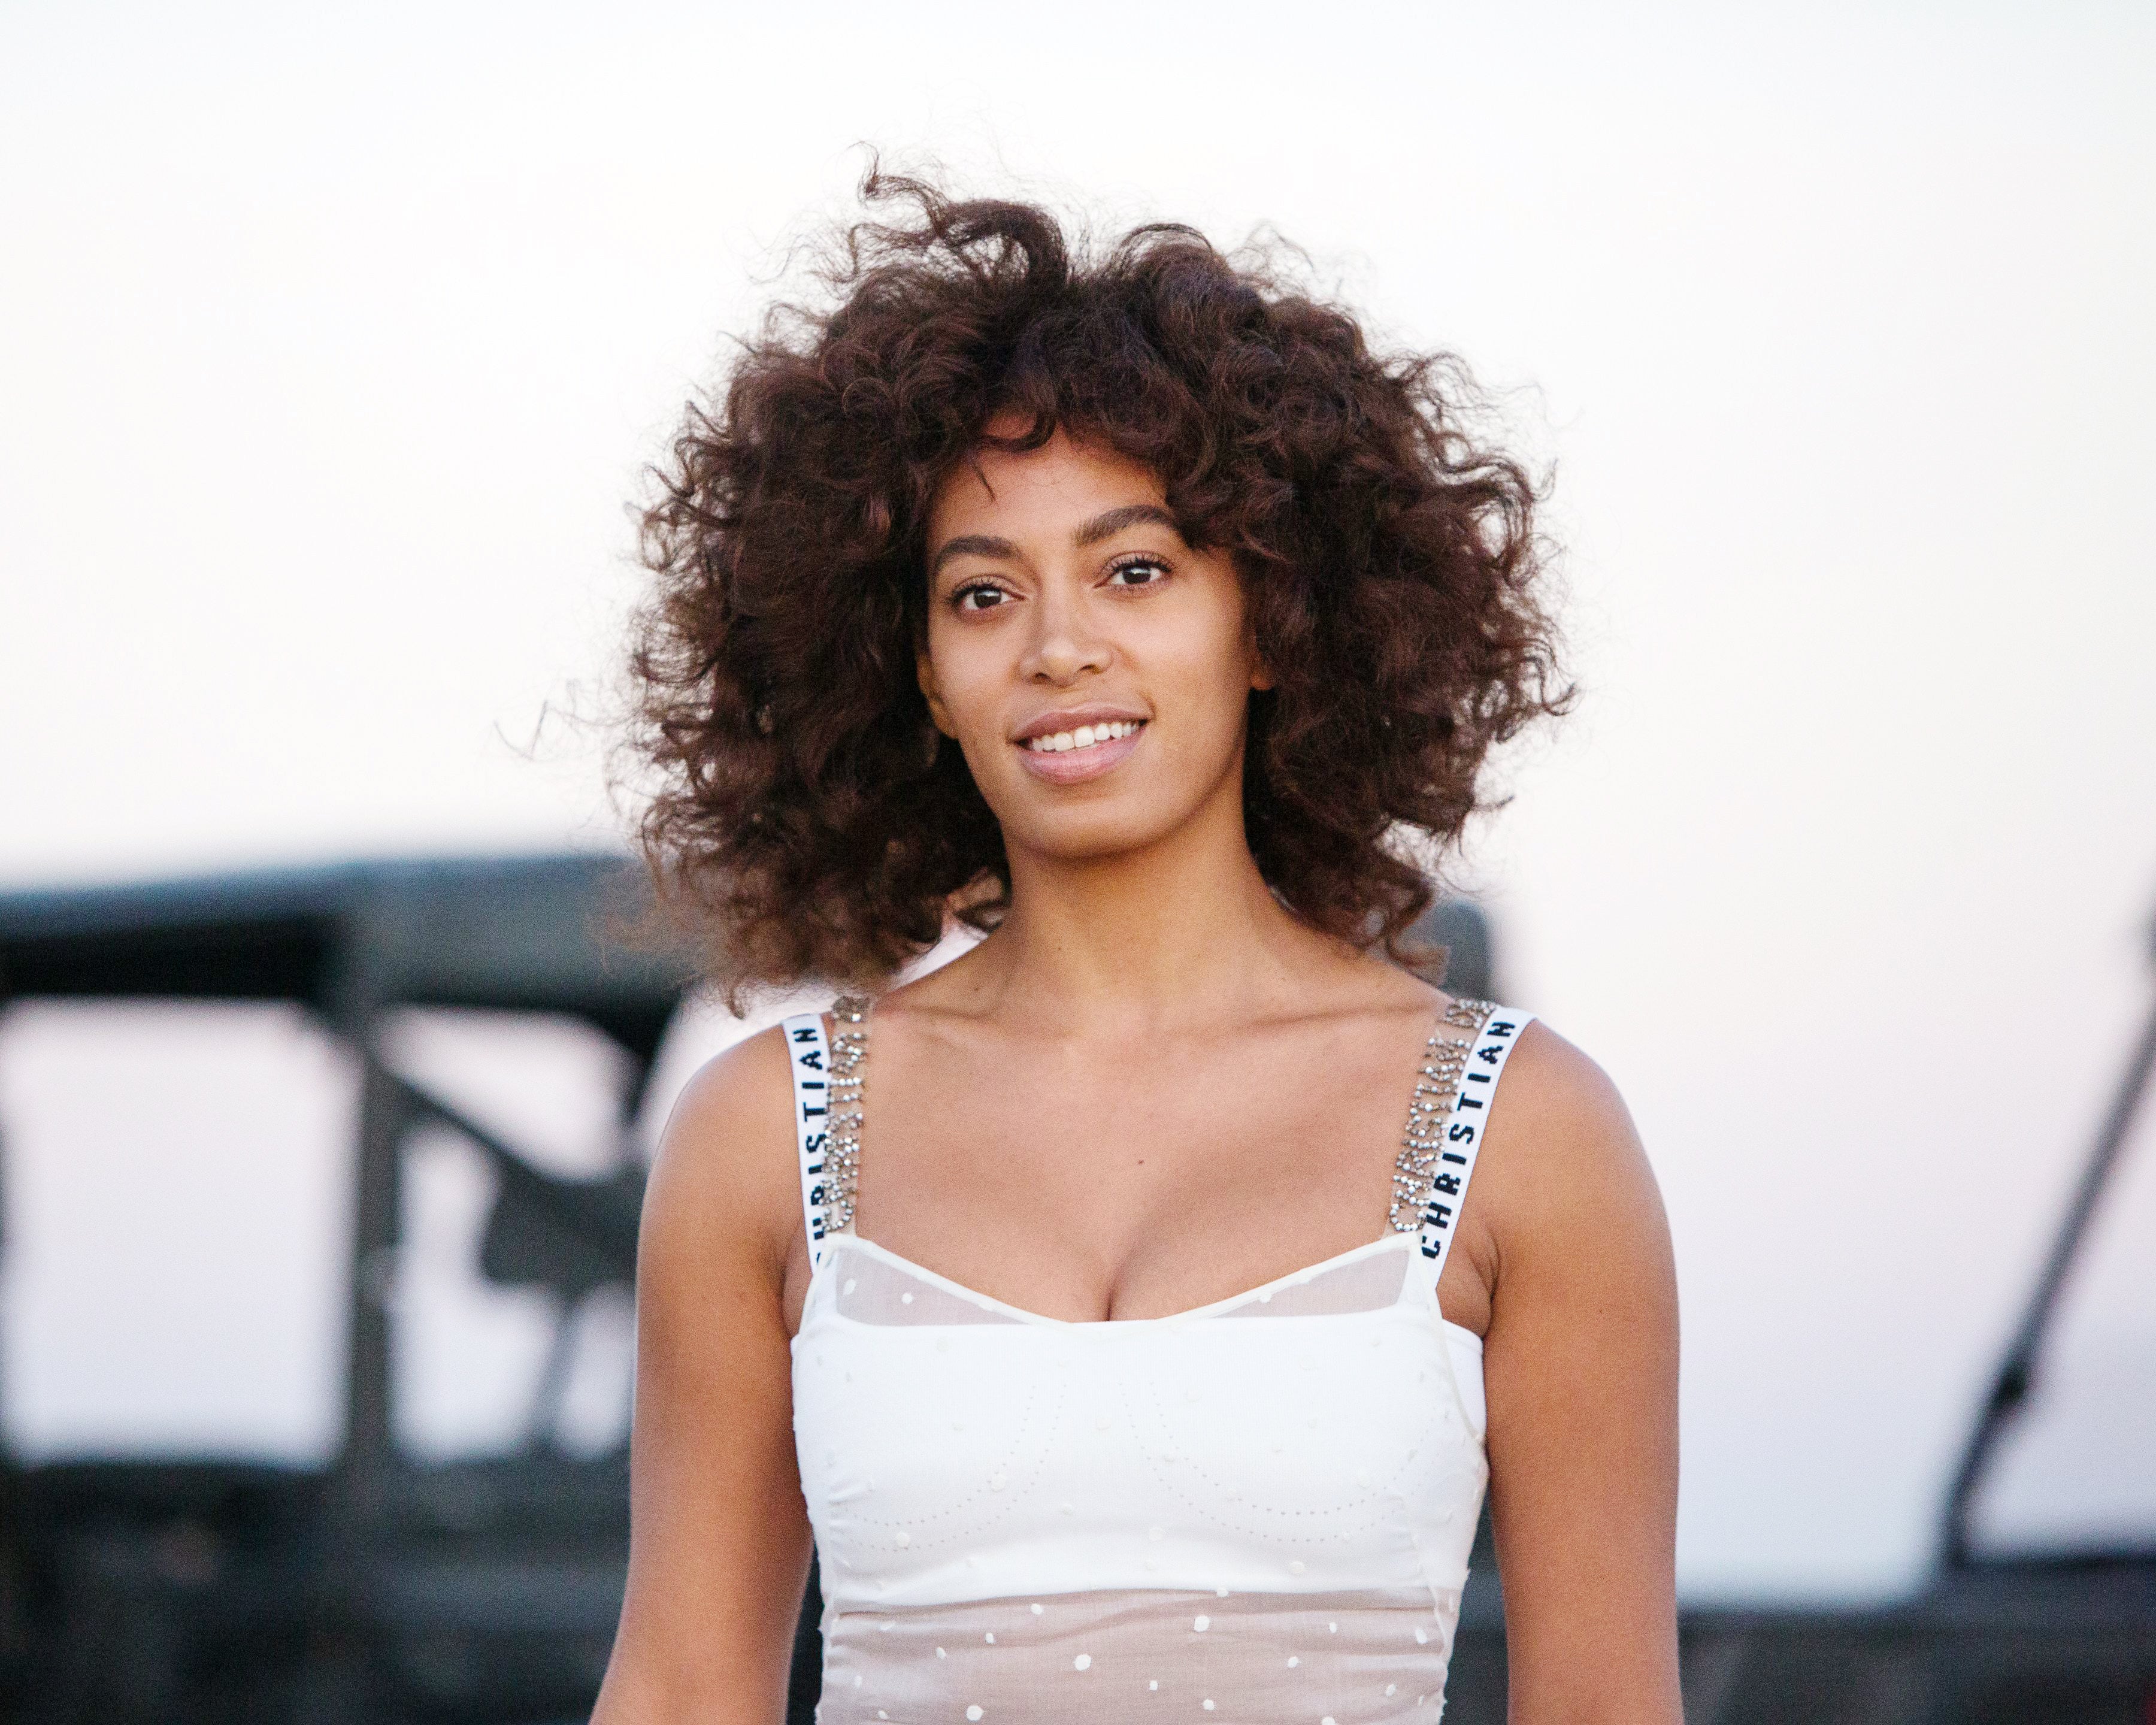 No Phones Were Allowed At Solange’s Guggenheim Show